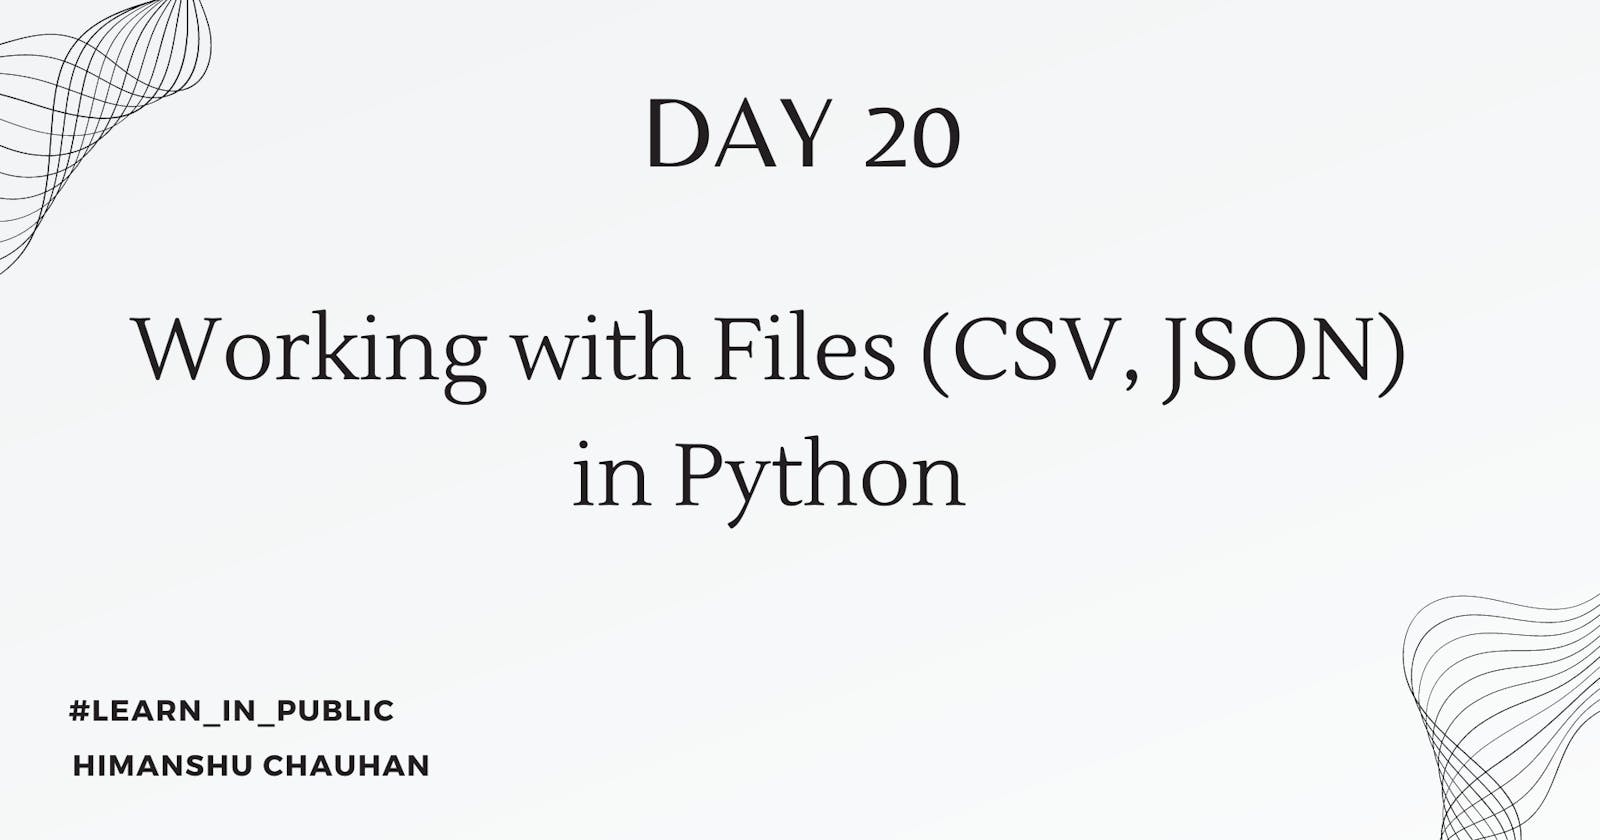 Day 20: Working with Files (CSV, JSON) in Python